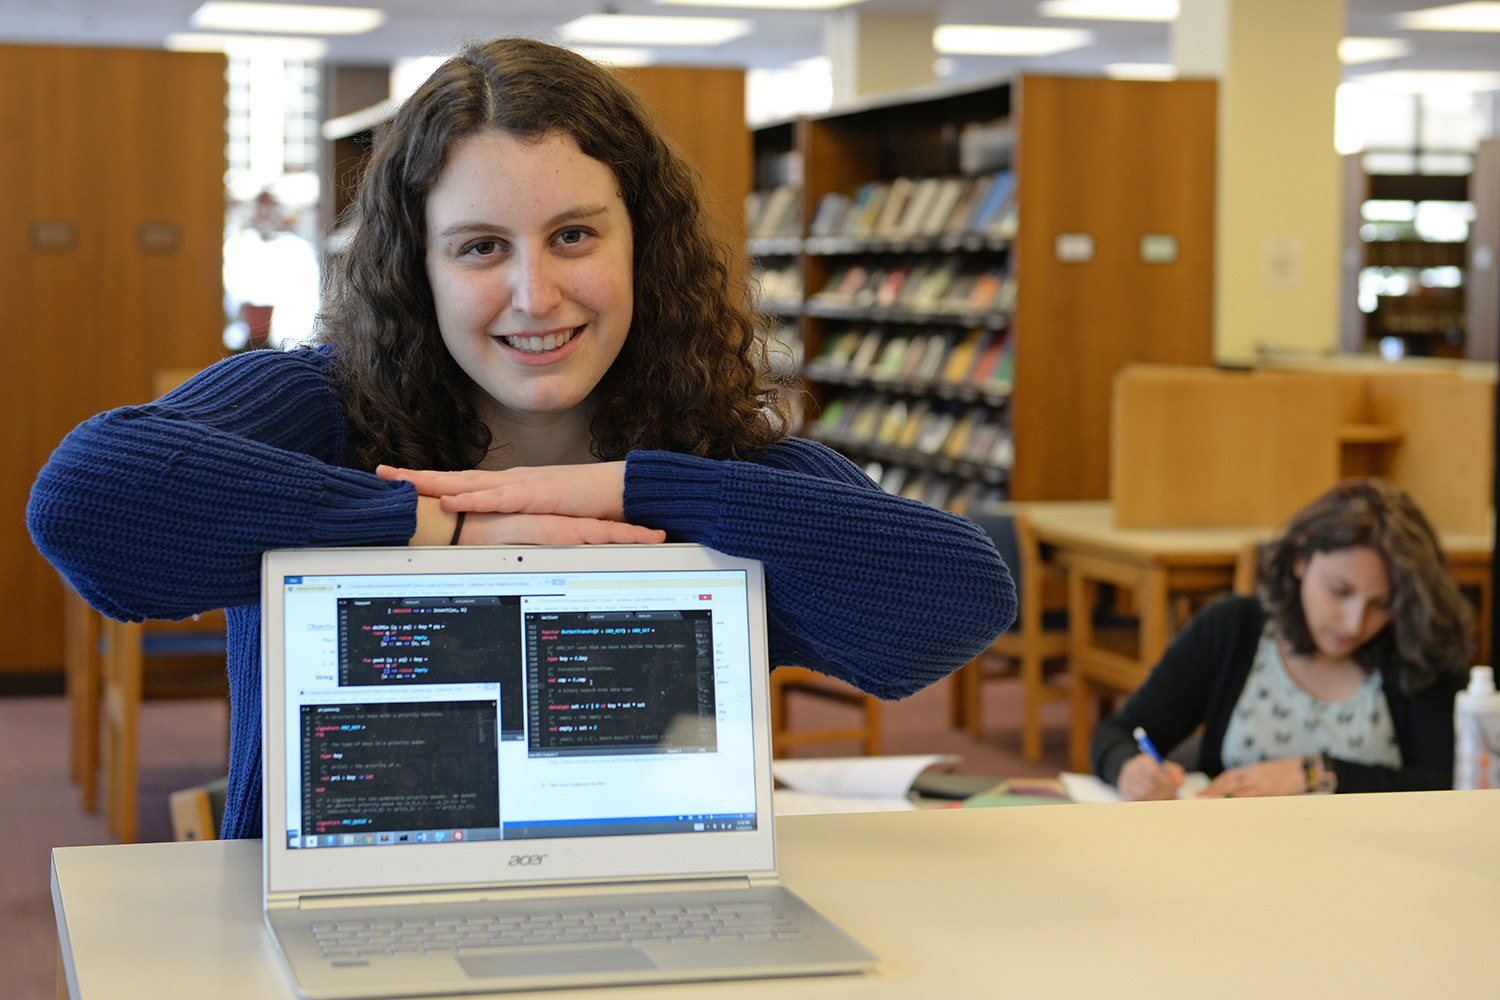 As a service-learning project, Alicia Gansley '15 helped create a web application for the Green Street Teaching and Learning Center. Gansley enjoys writing programs from the comfort of the Science Library. "This is where you're usually find me," she said.